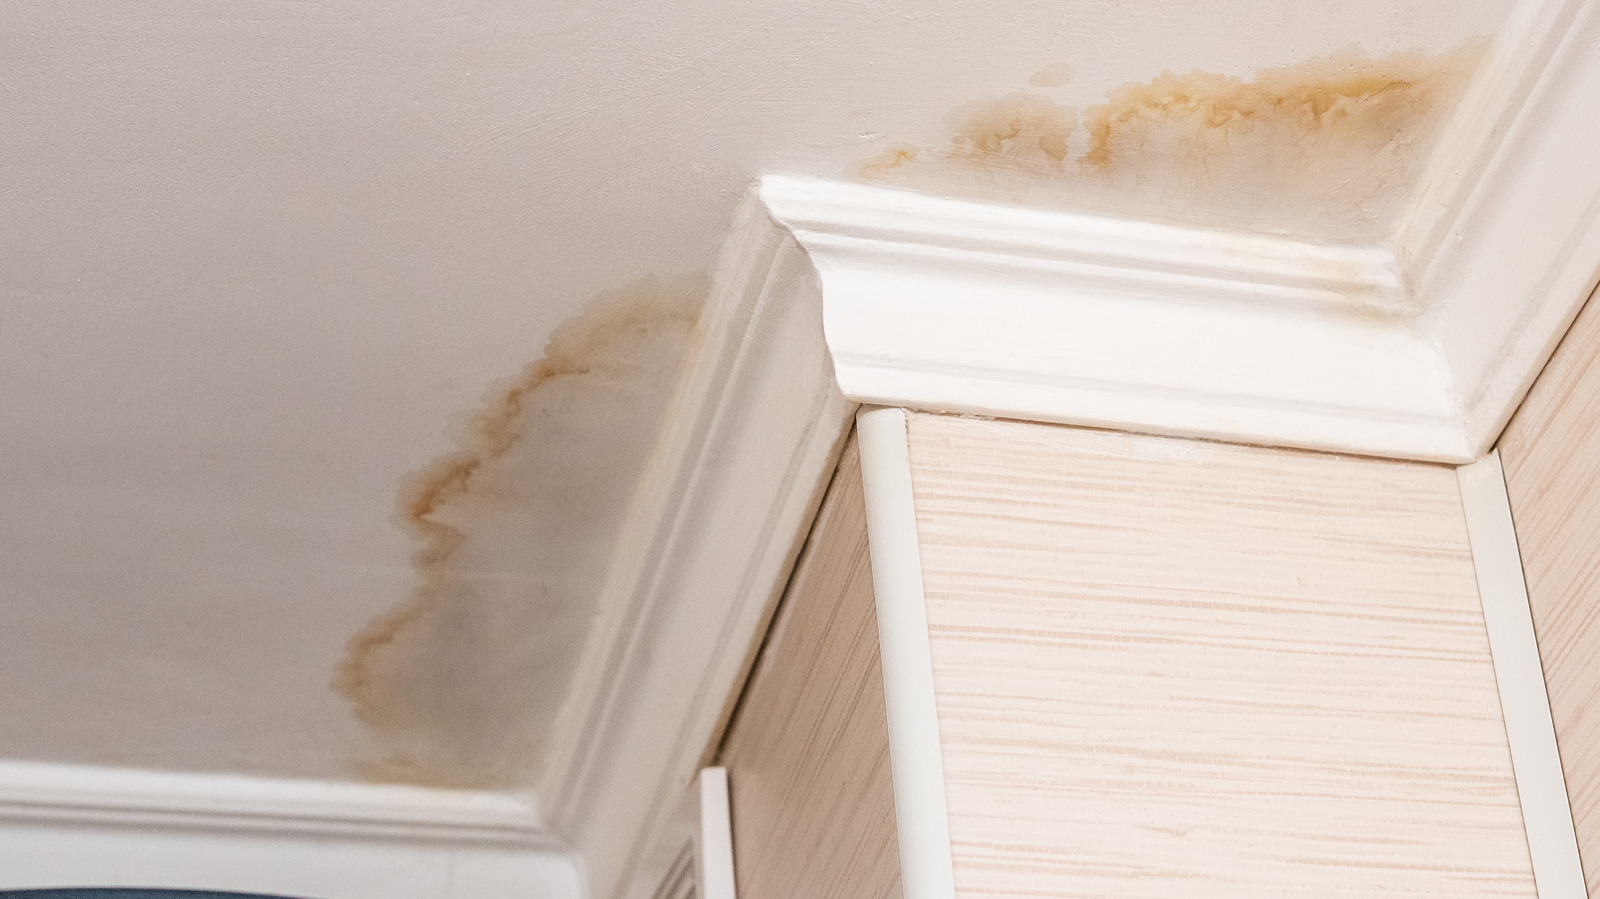 How To Fix A Ceiling With Water Damage So It Stays High And Dry